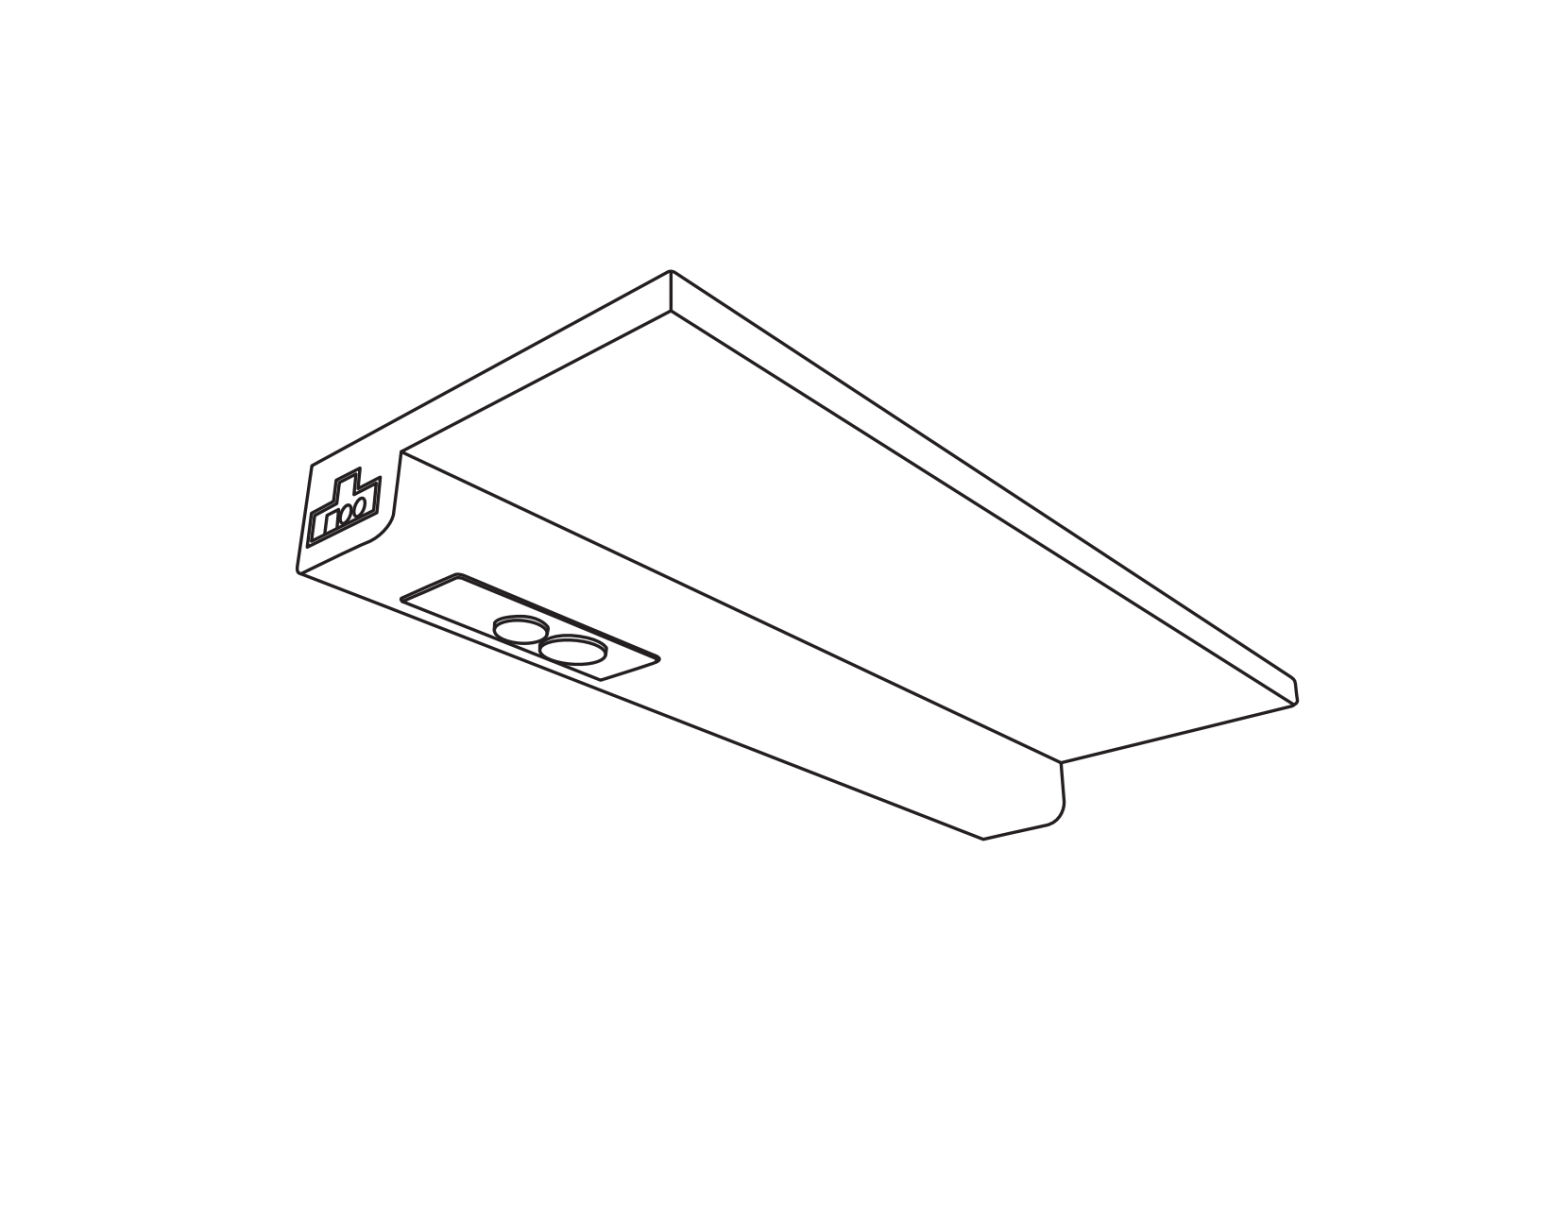 FEIT UCL18FP Flat Panel Under Cabinet Light Installation Guide